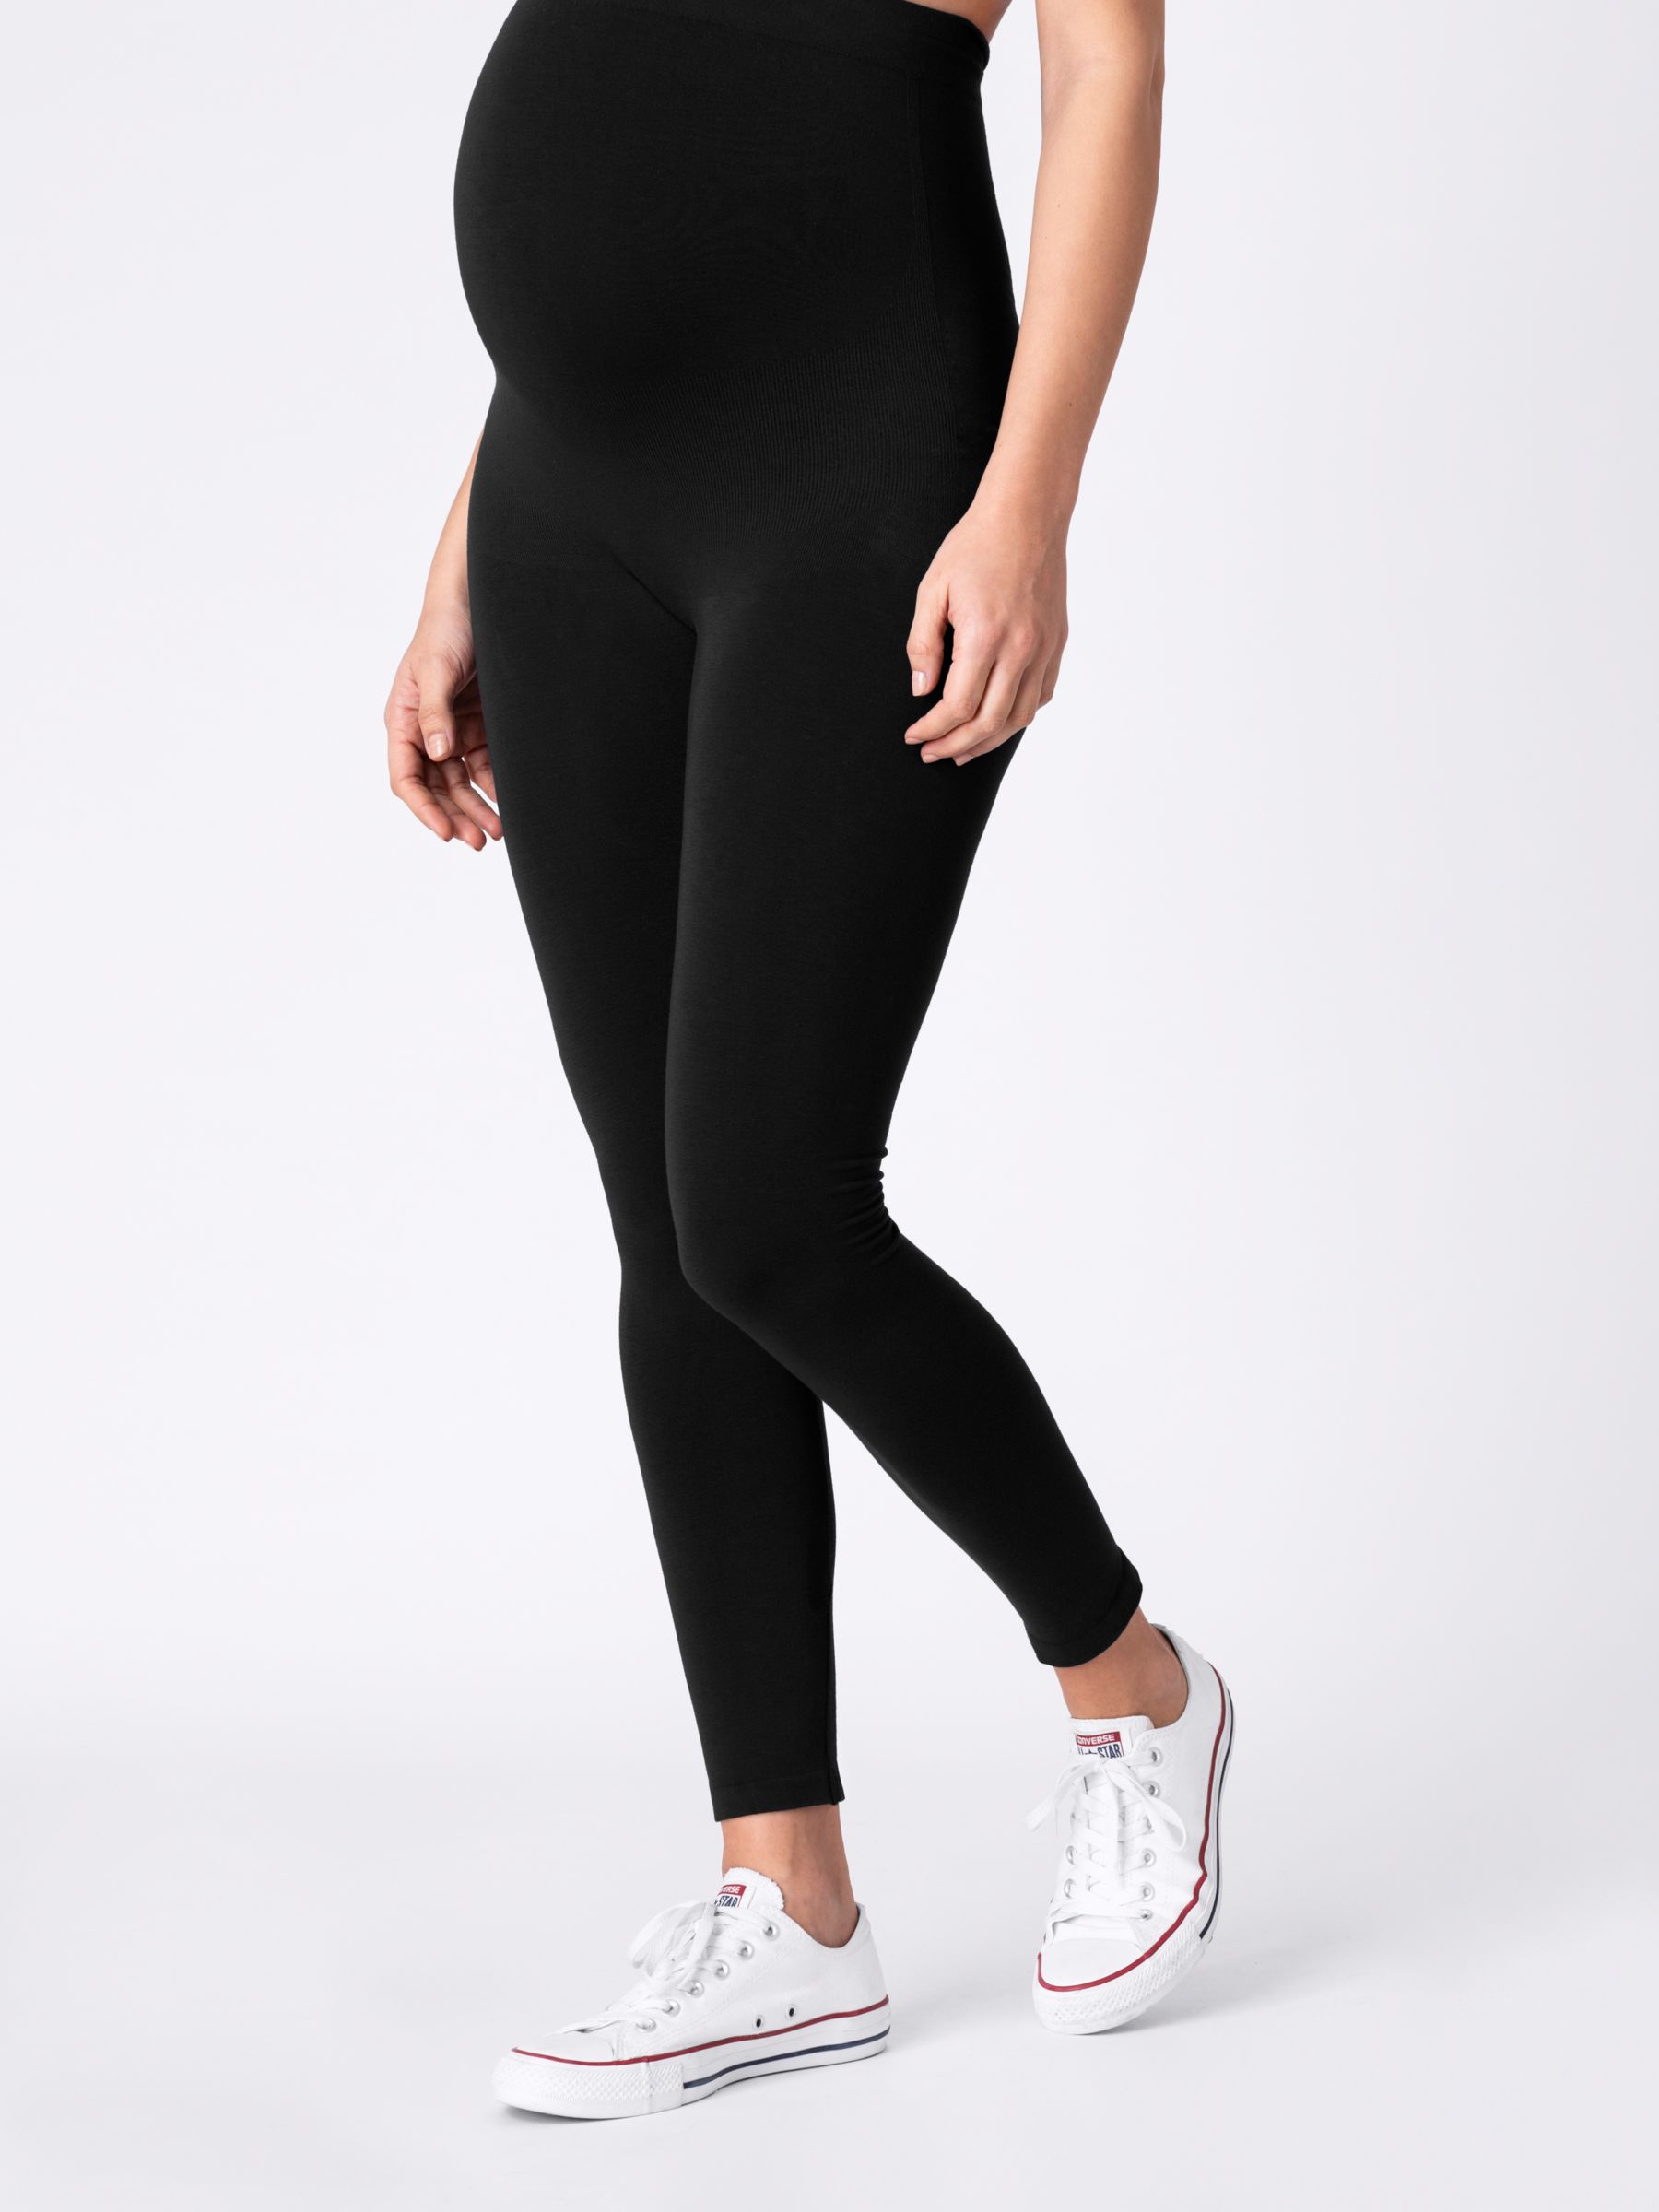 Seraphine Maternity Tights 100 Denier - 3 Pack - Online Canada